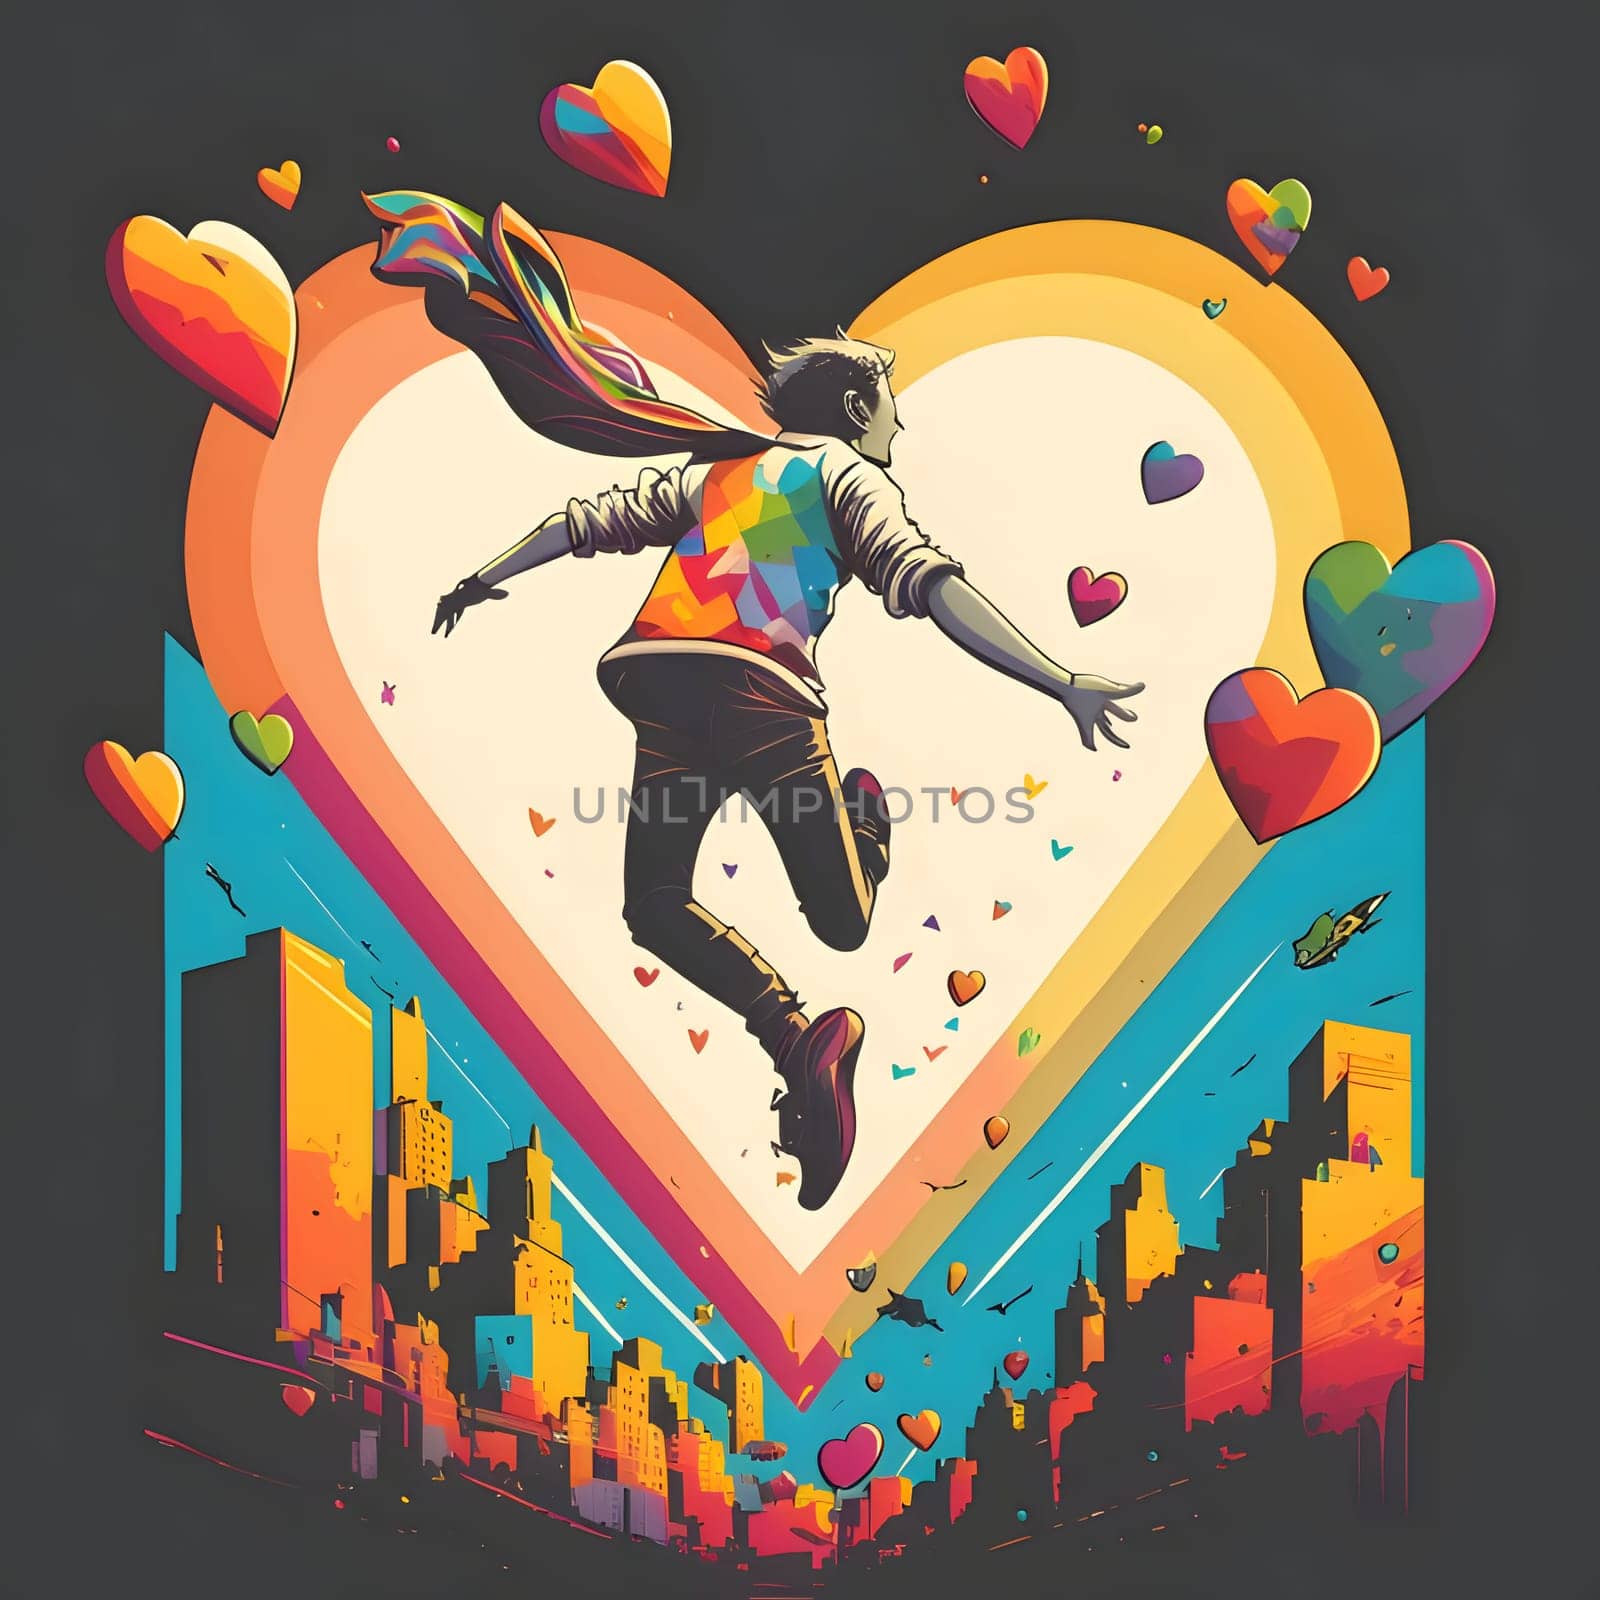 Abstract illustration of a man jumping over colorful stripes, blocks in the background, colorful hearts. Heart as a symbol of affection and love. The time of falling in love and love.